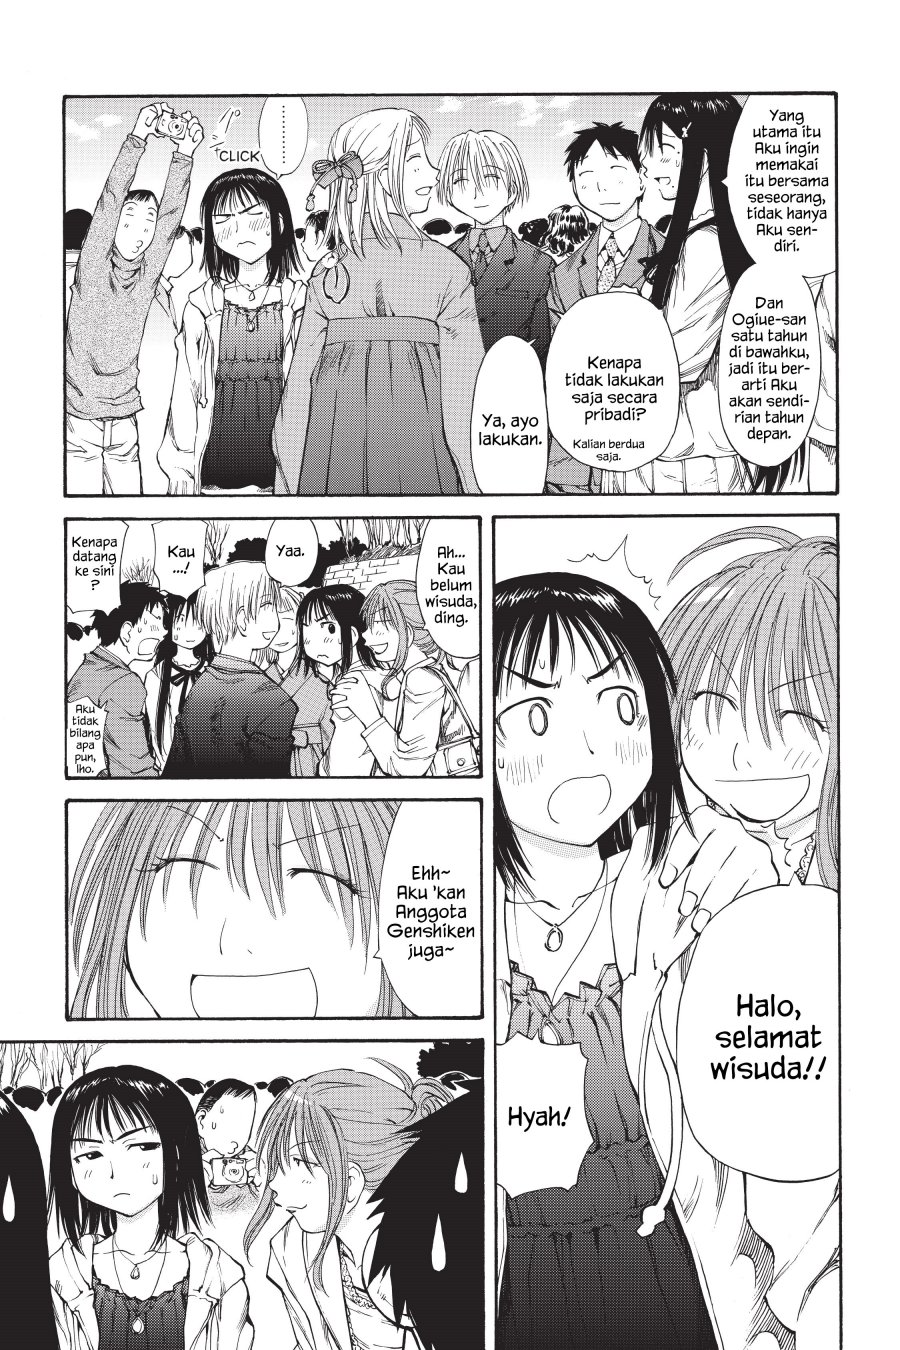 Genshiken – The Society for the Study of Modern Visual Culture Chapter 55 Image 4